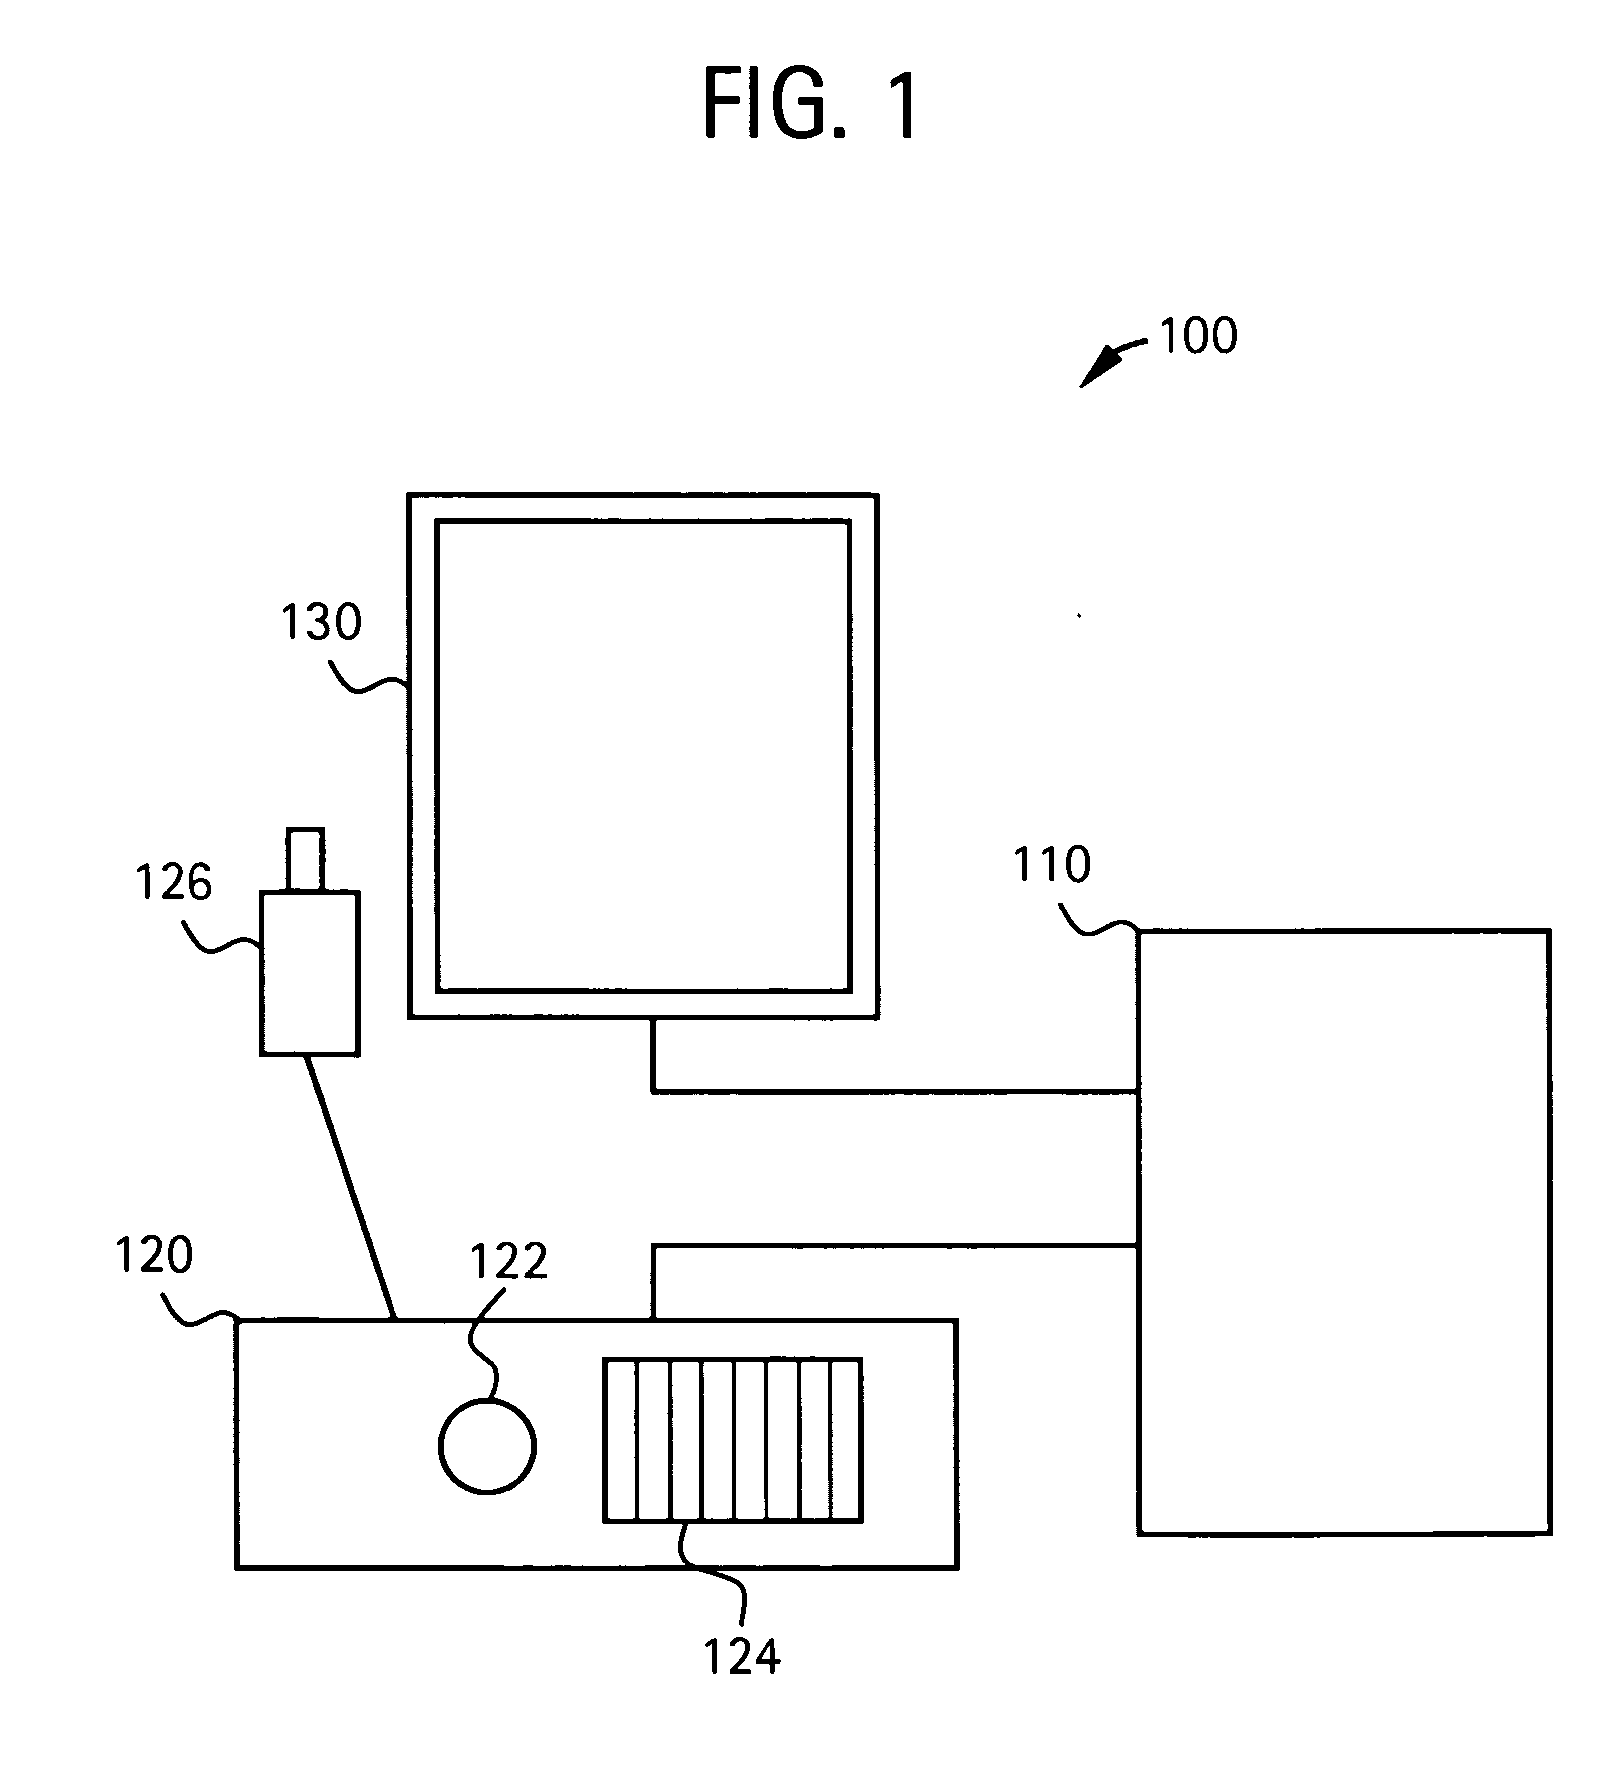 Method and apparatus for three-dimensional interactive tools for semi-automatic segmentation and editing of image objects